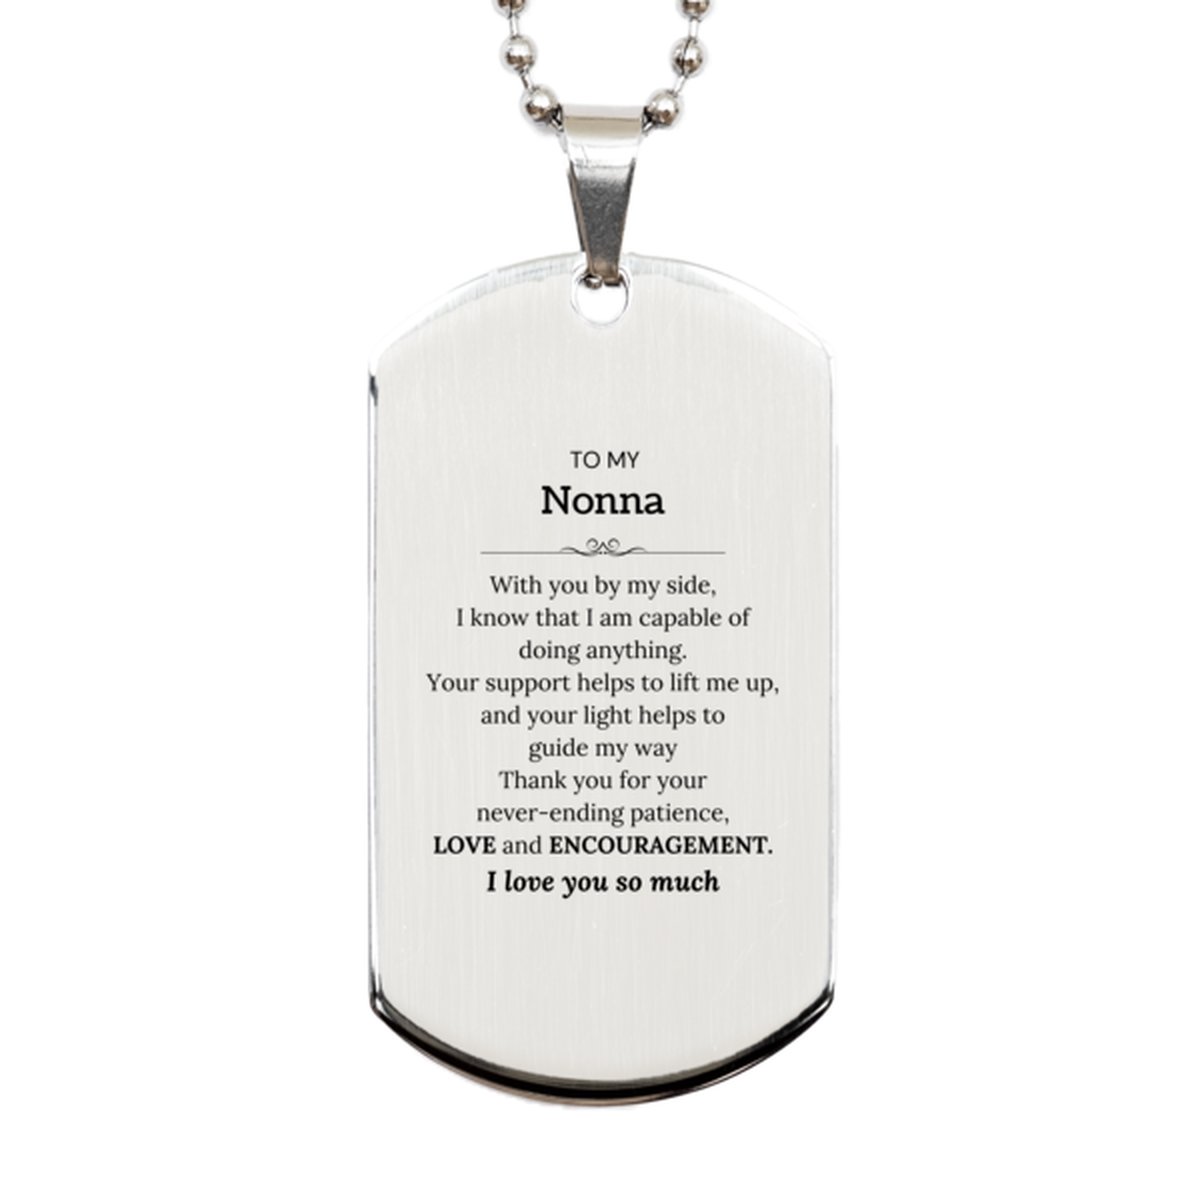 Appreciation Nonna Silver Dog Tag Gifts, To My Nonna Birthday Christmas Wedding Keepsake Gifts for Nonna With you by my side, I know that I am capable of doing anything. I love you so much